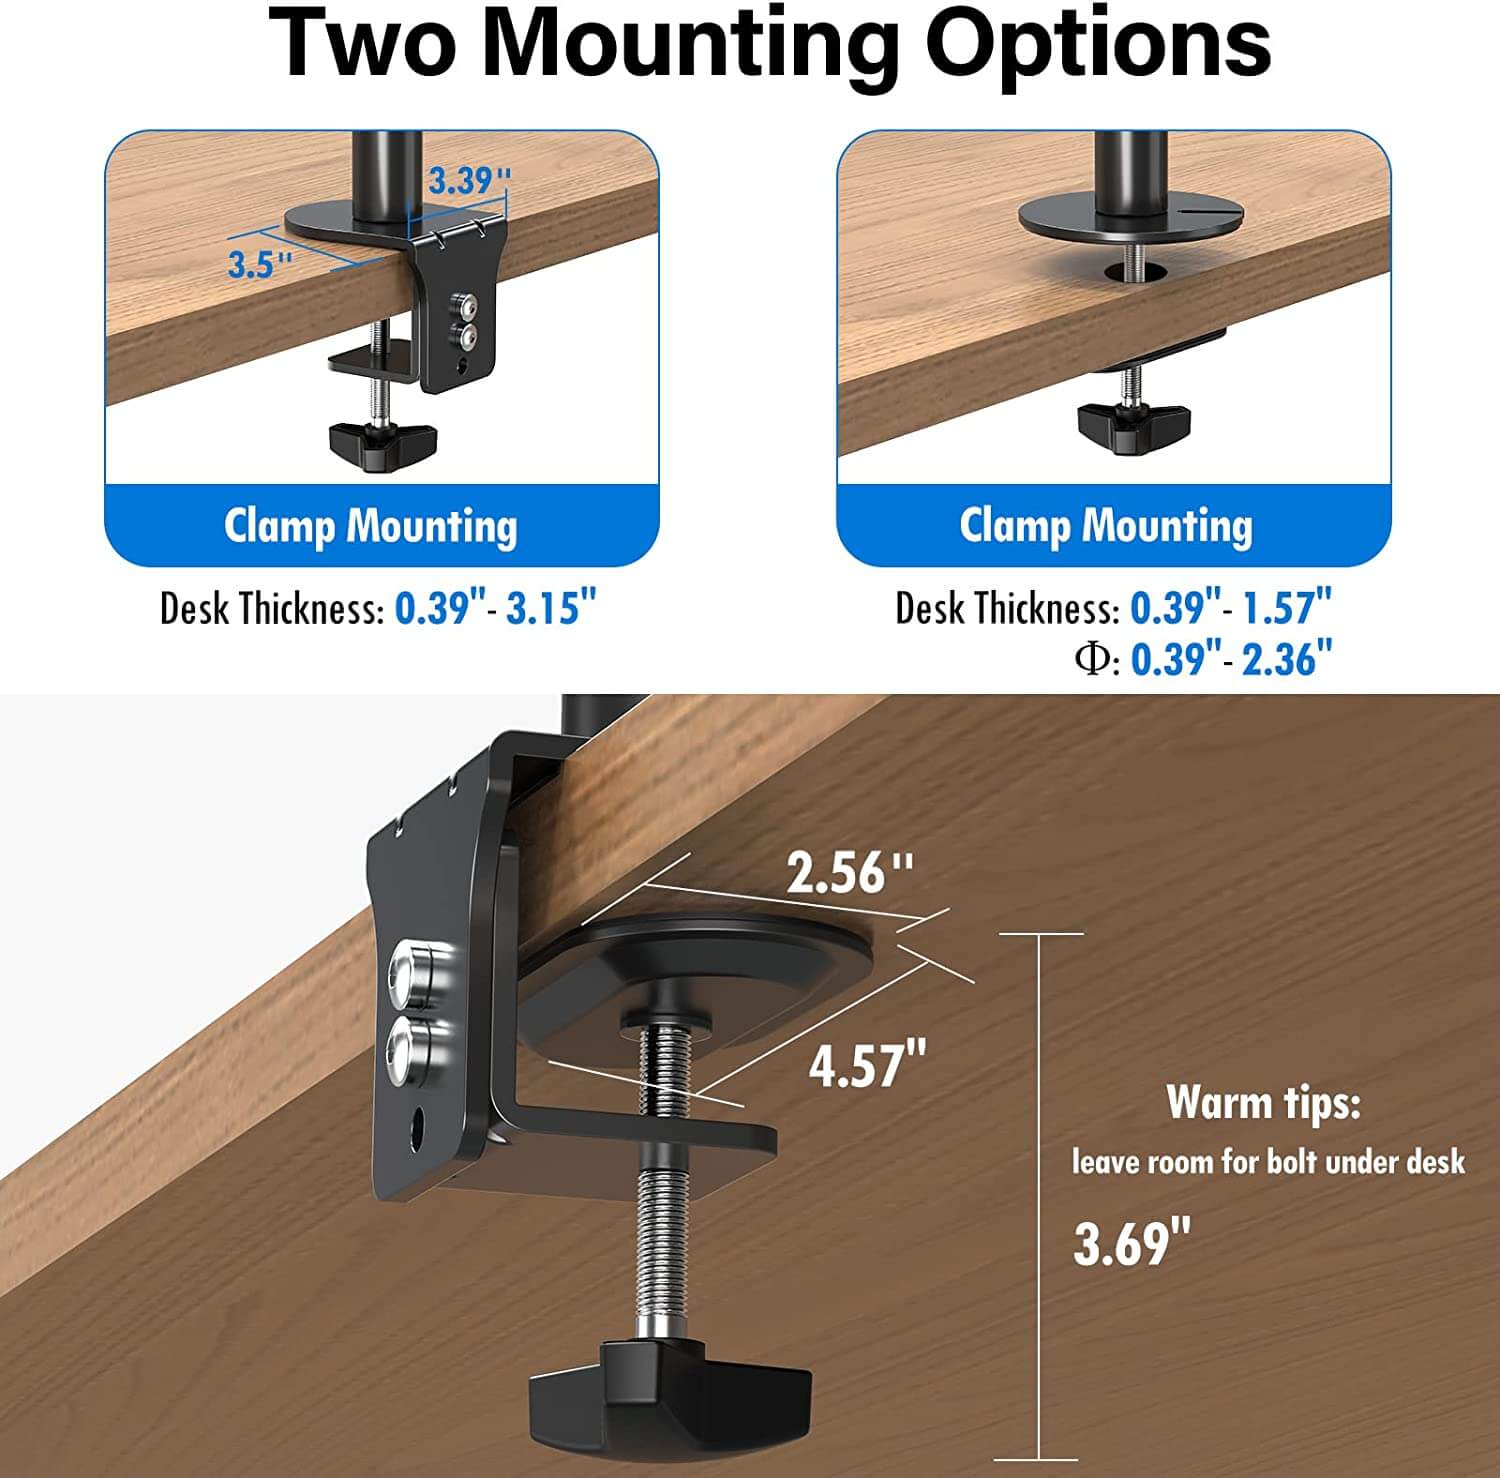 quad monitor stand offers 2 mounting options